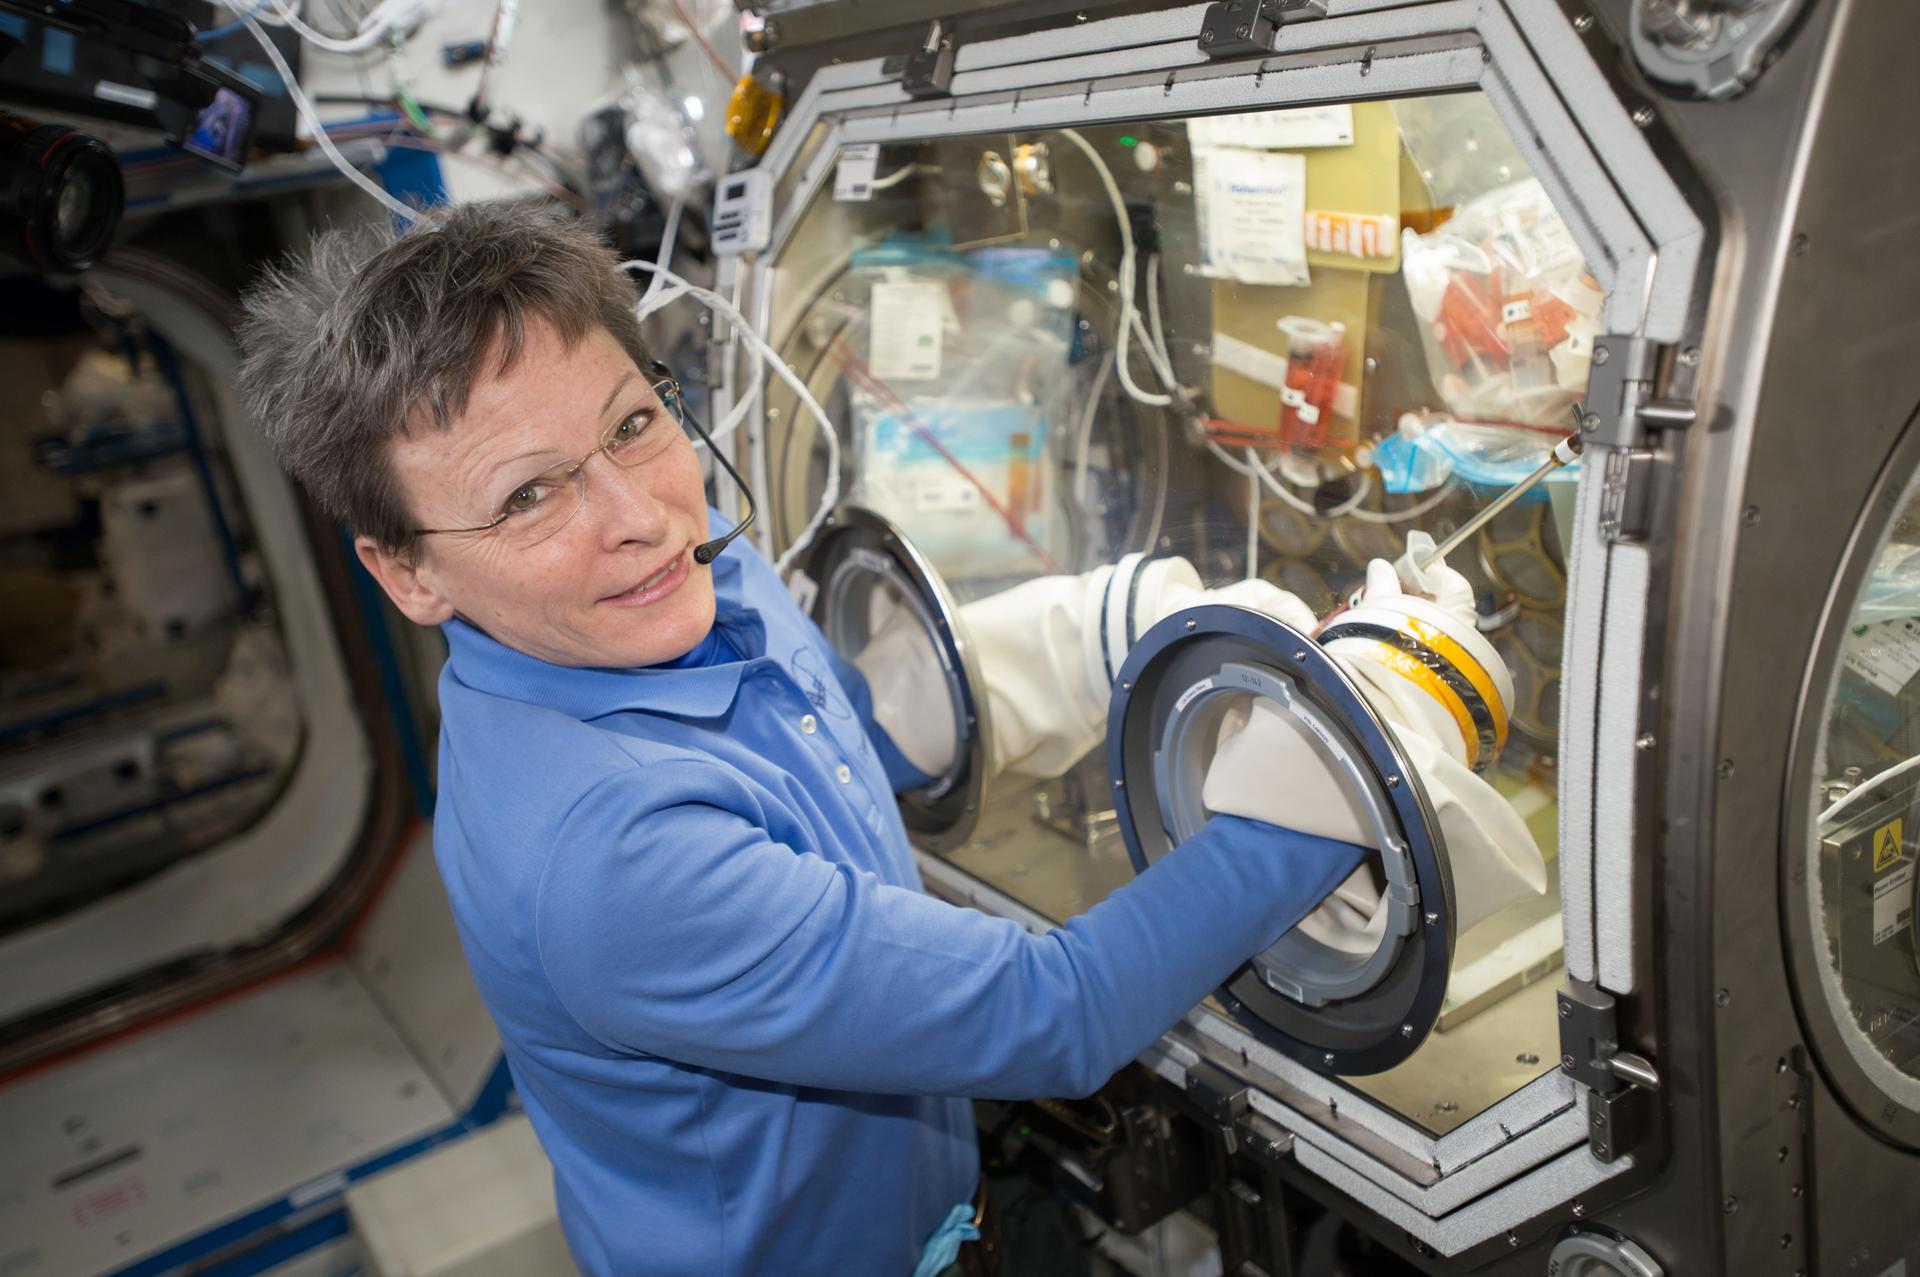 Commander Peggy Whitson is working on the OsteoOmics bone cell study that utilizes the Microgravity Science Glovebox